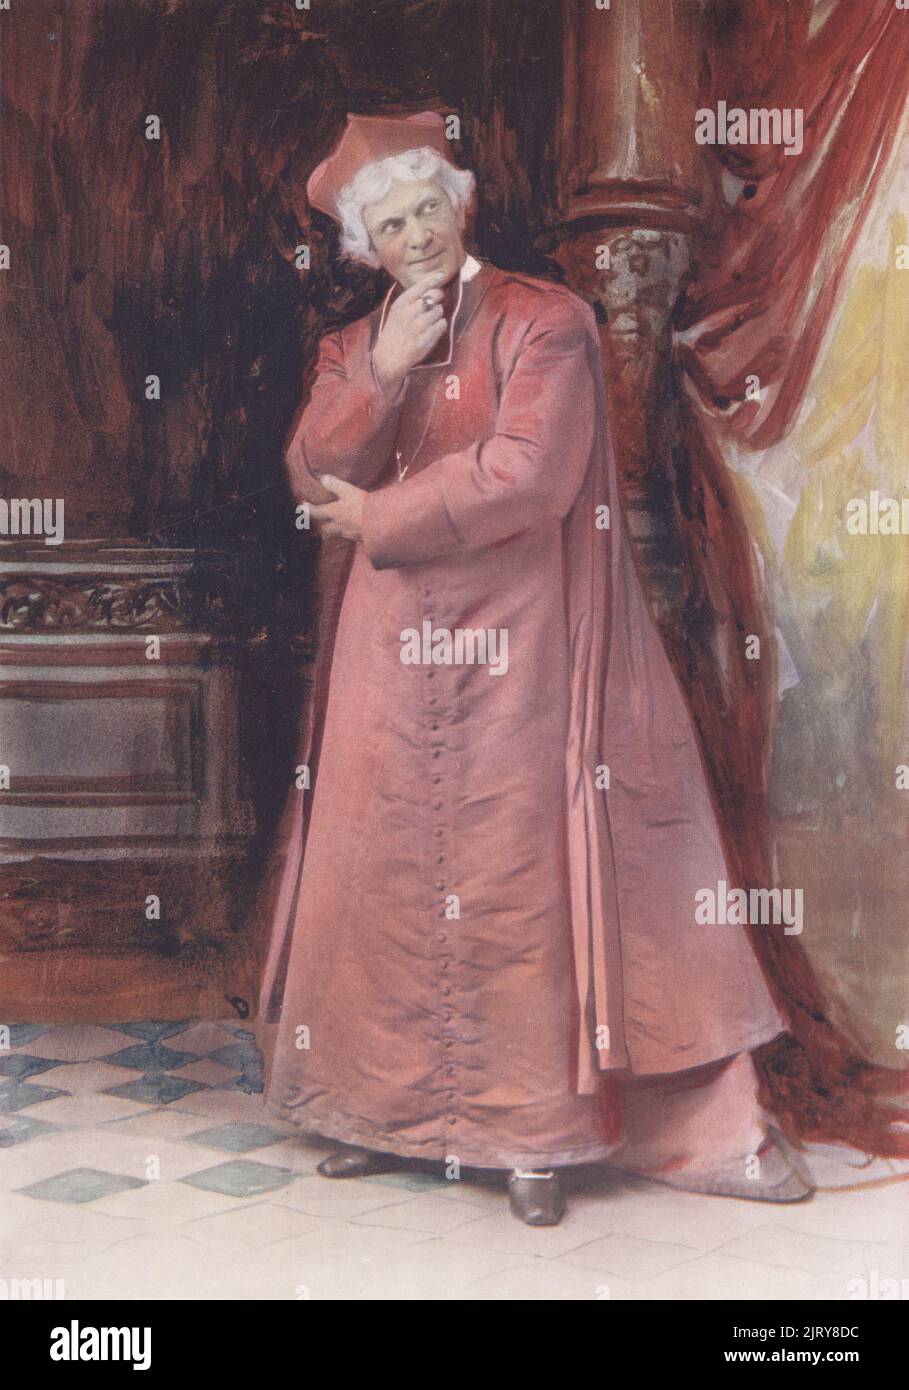 Arthur Bourchier as the Bishop in The Bishop's Move, a comedy by Mrs Pearl Craigie, 1902. Arthur Bourchier, English actor and theatre manager, 1863-1927. Photograph by Alfred Ellis and Walery (Stanislaw Julian Ignacy). Colour printing of a hand-coloured illustration based on a monochrome photograph from George Newnes’s Players of the Day, London, 1905. Stock Photo